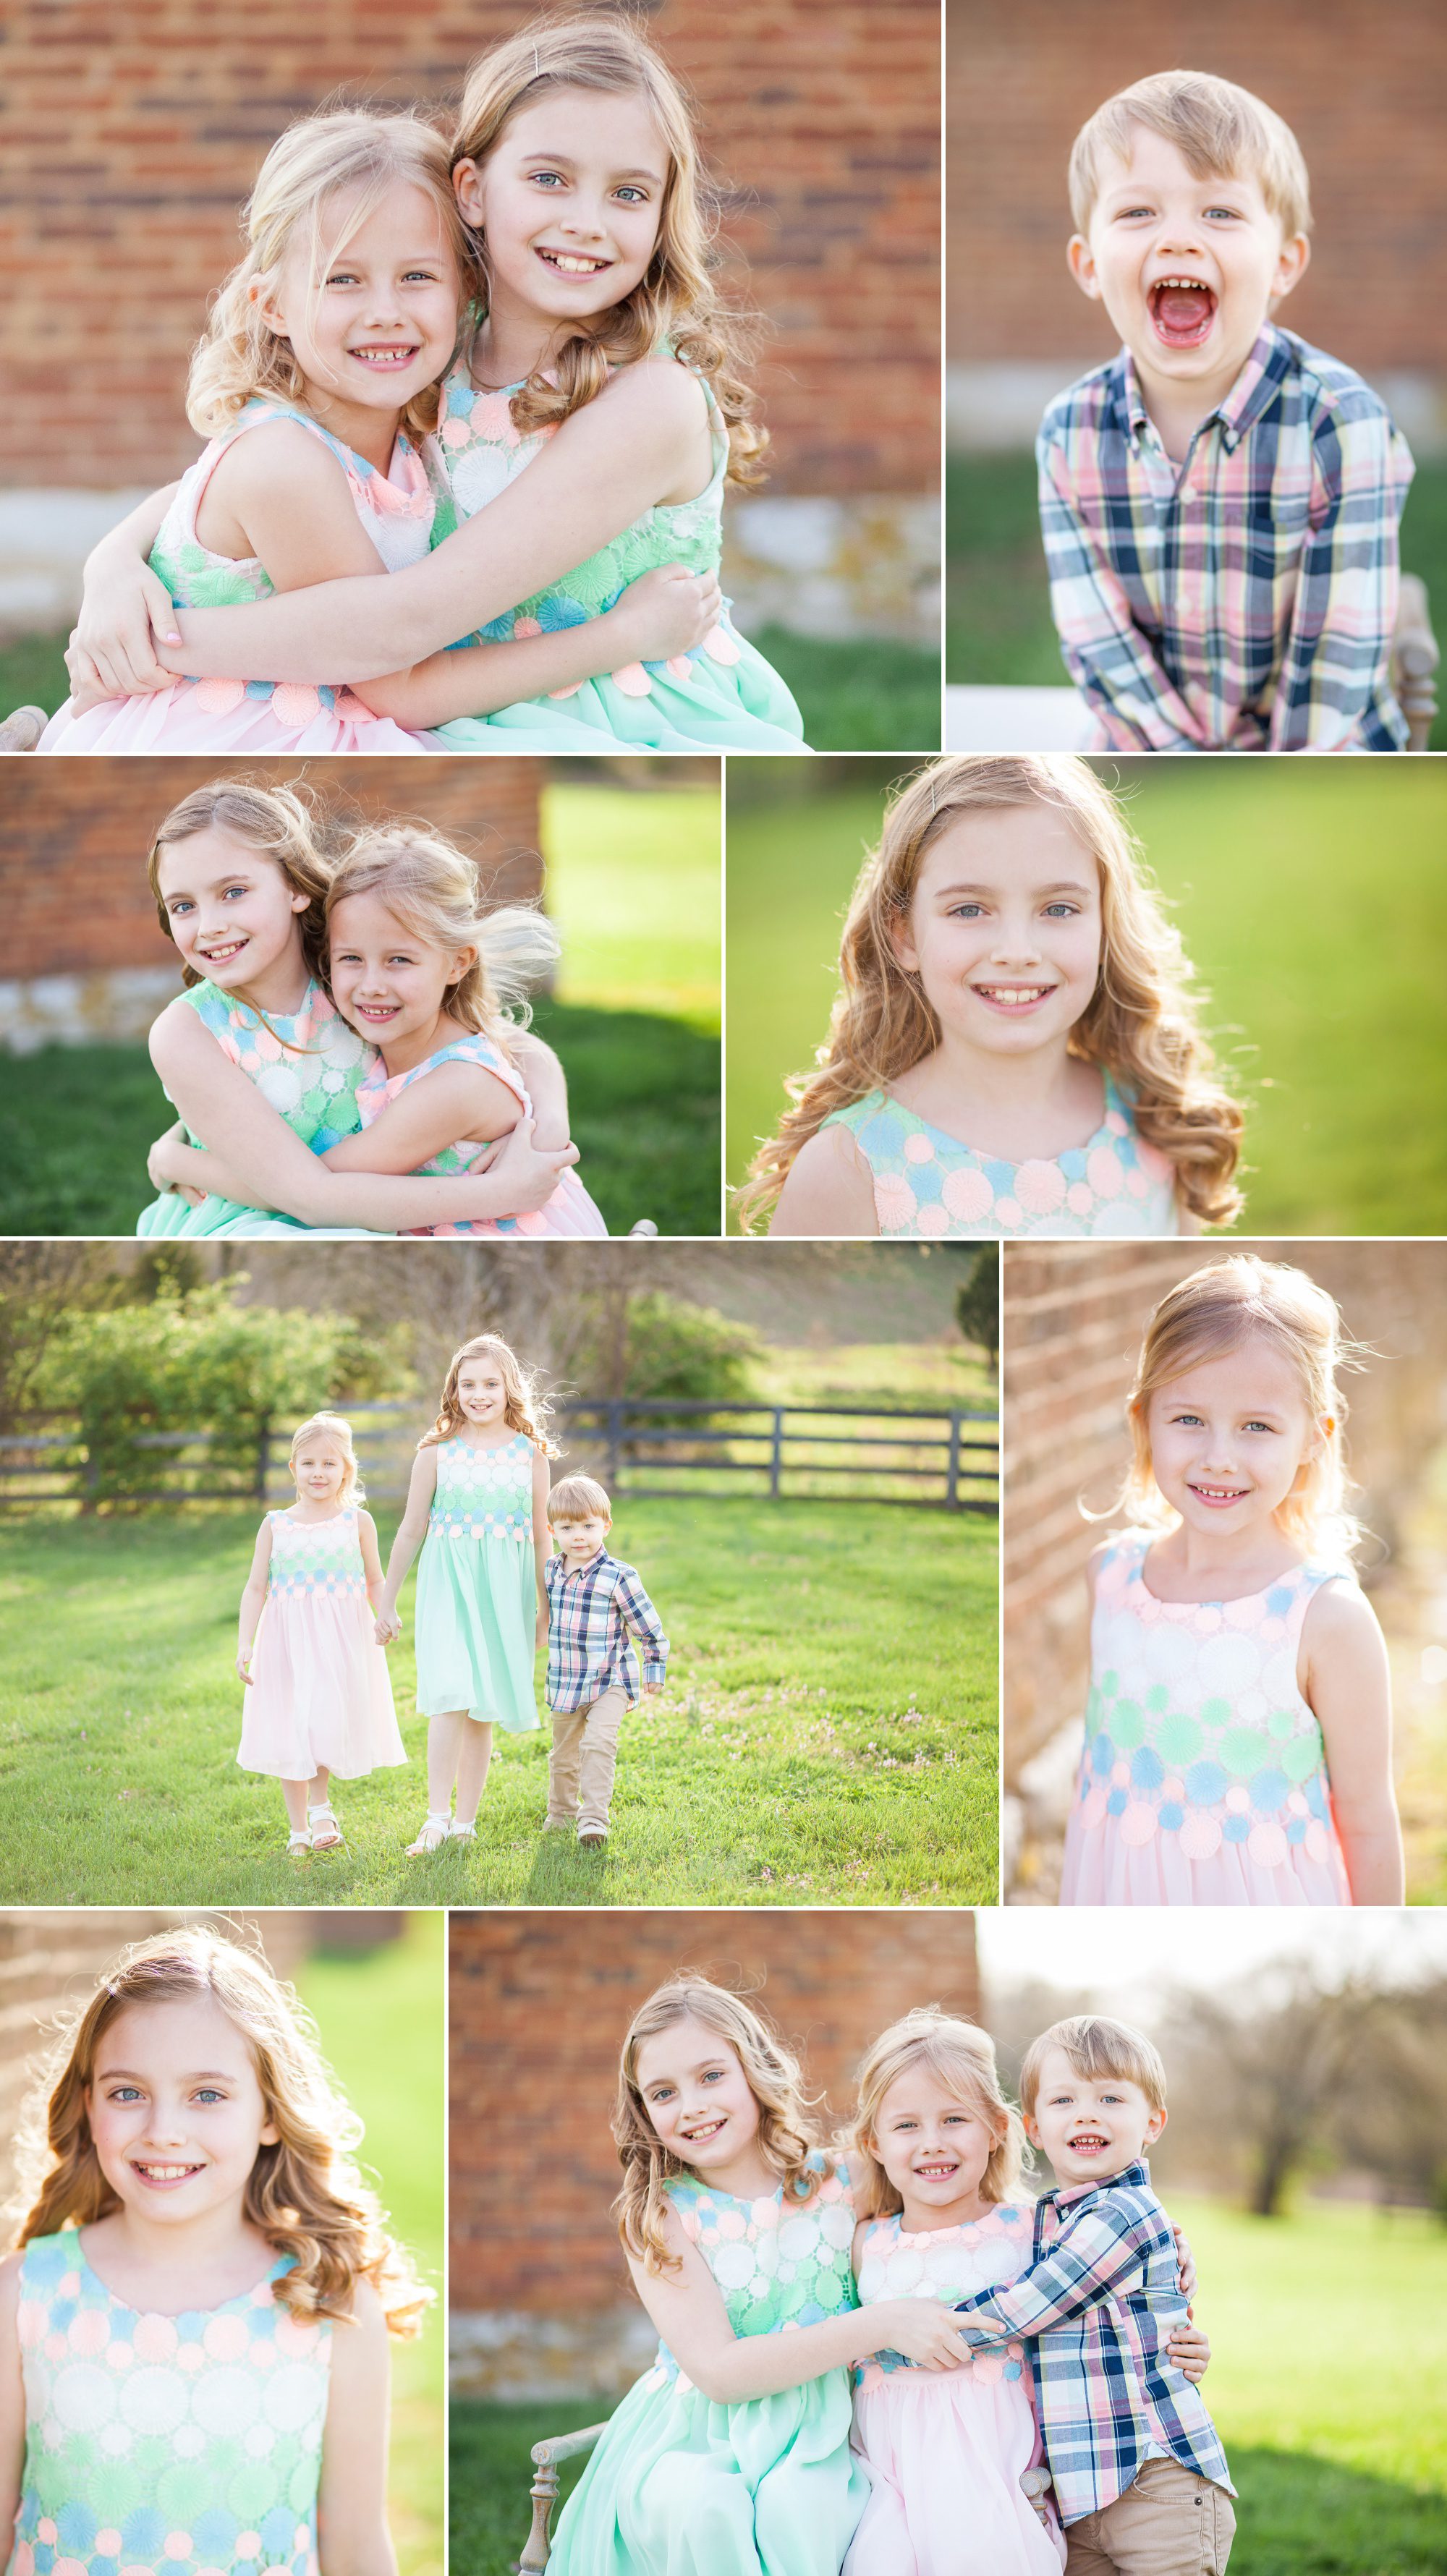 Spring Photography session with kids at Ravenswood Mansion in Brentwood TN. Photo by Krista Lee Photography, Franklin TN